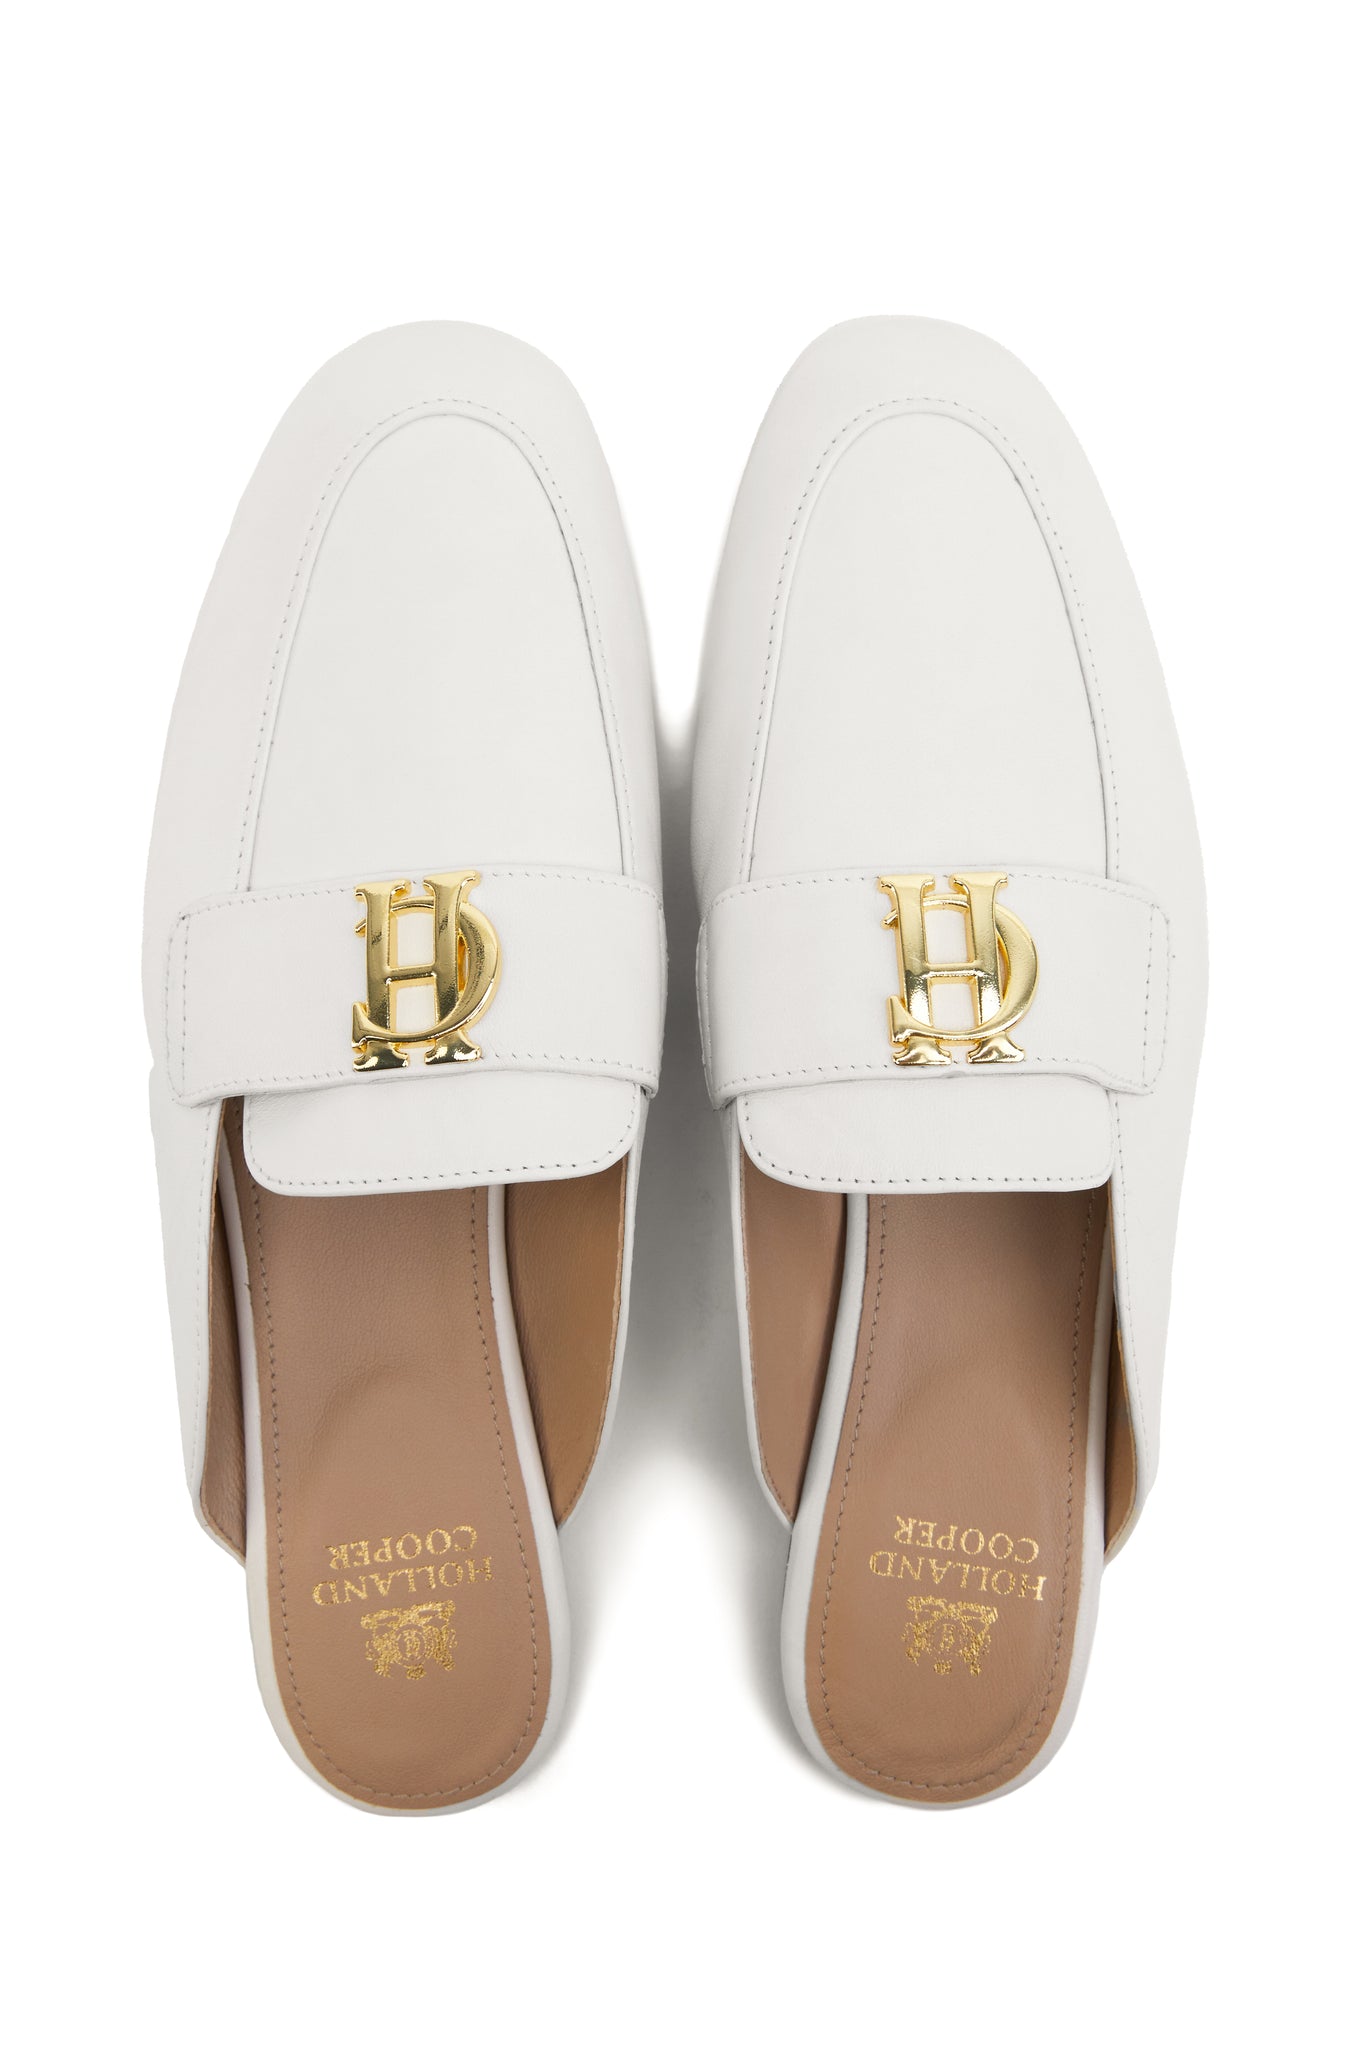 white leather backless loafers with a slightly pointed toe and gold hardware to the top and gold foil branding on inner sole